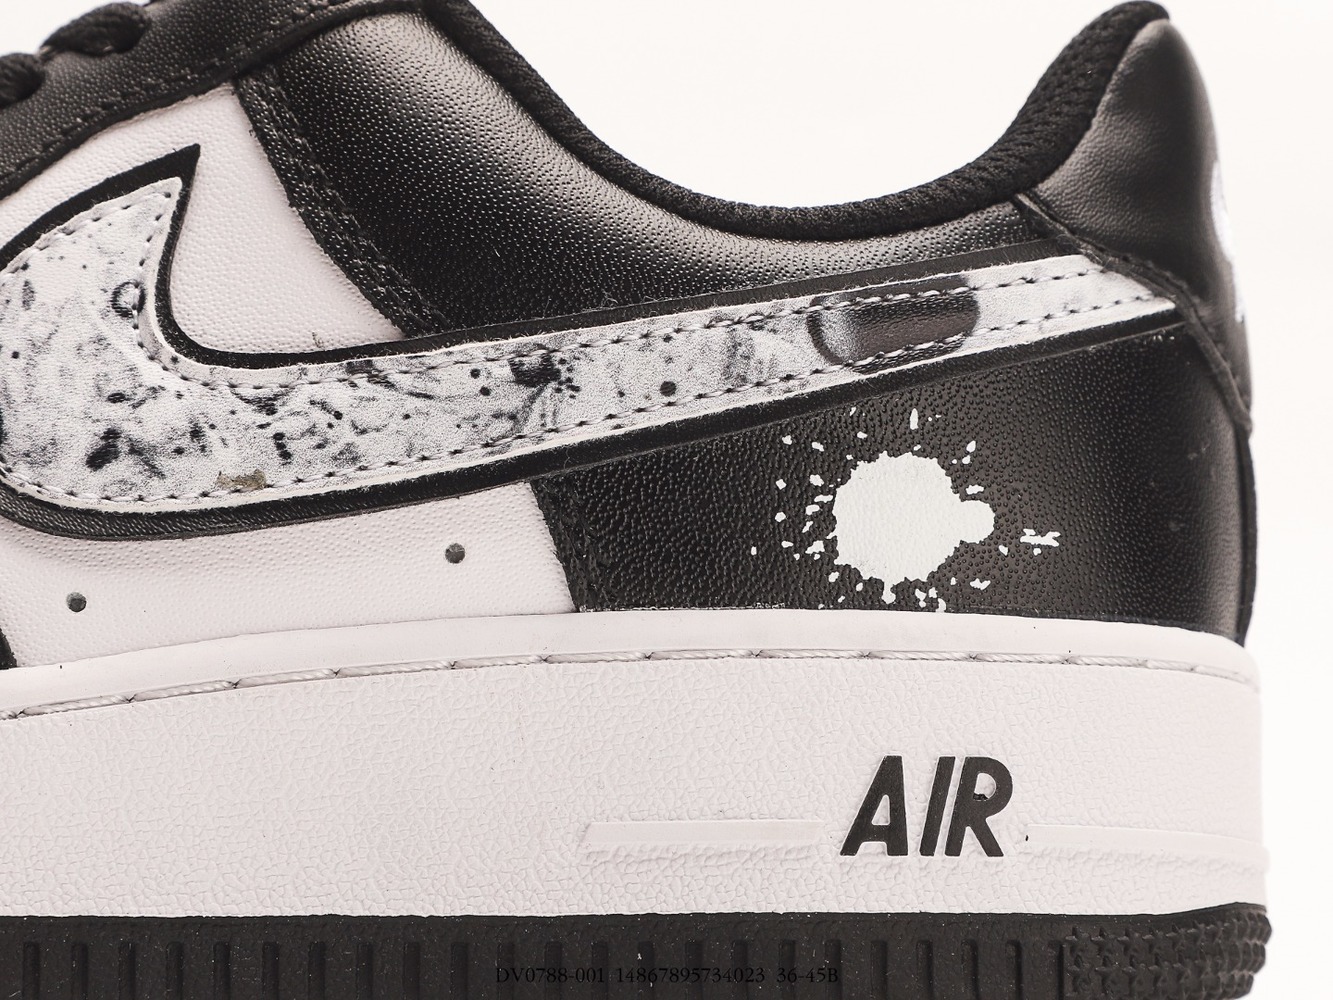 Nike Air Force 1 Low Force 1 _DV0788-001